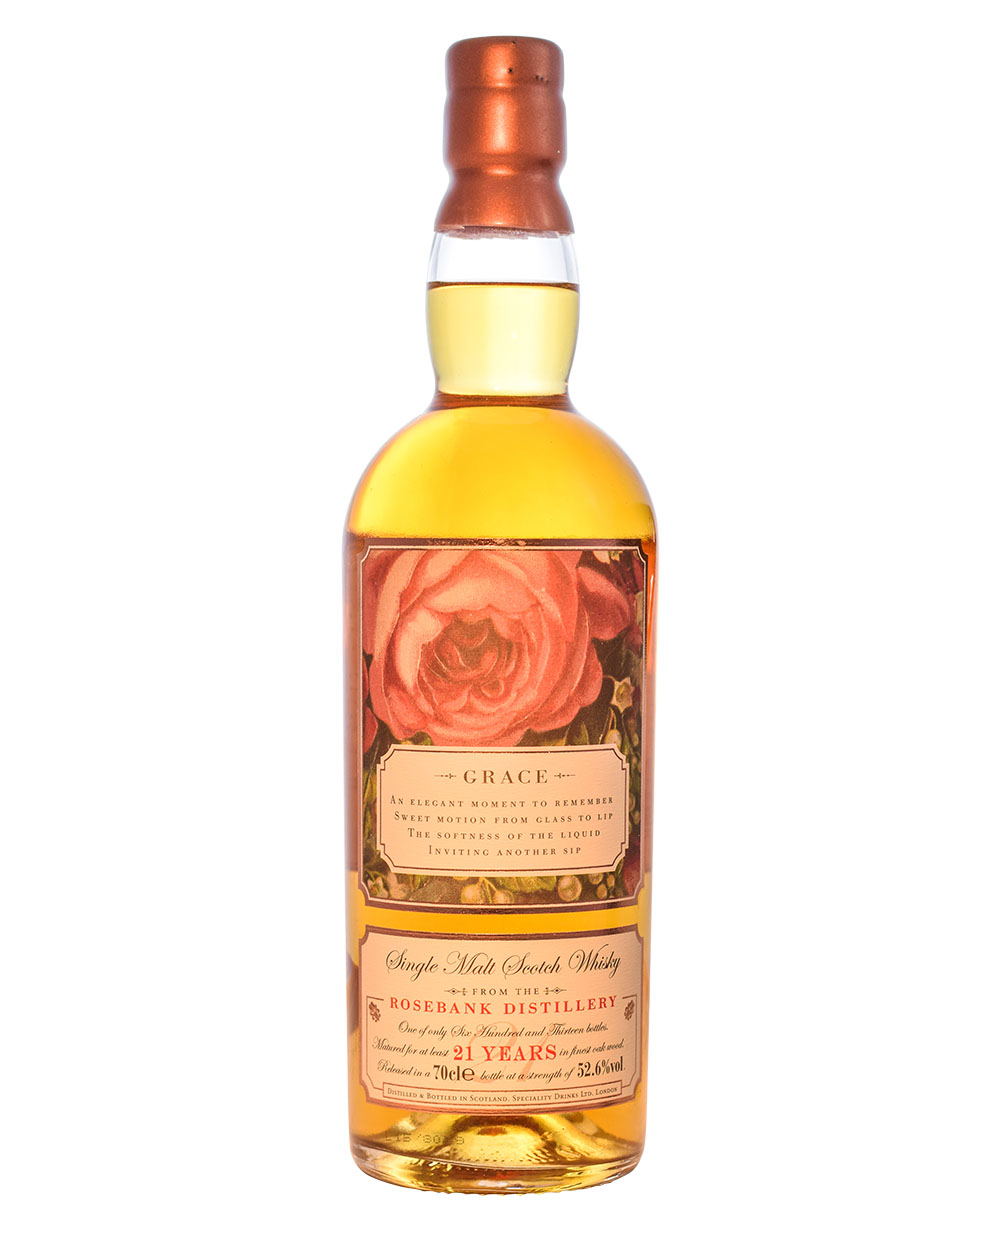 Rosebank The Roses Edition IV – Grace (21 Years Old) Musthave Malts MHM